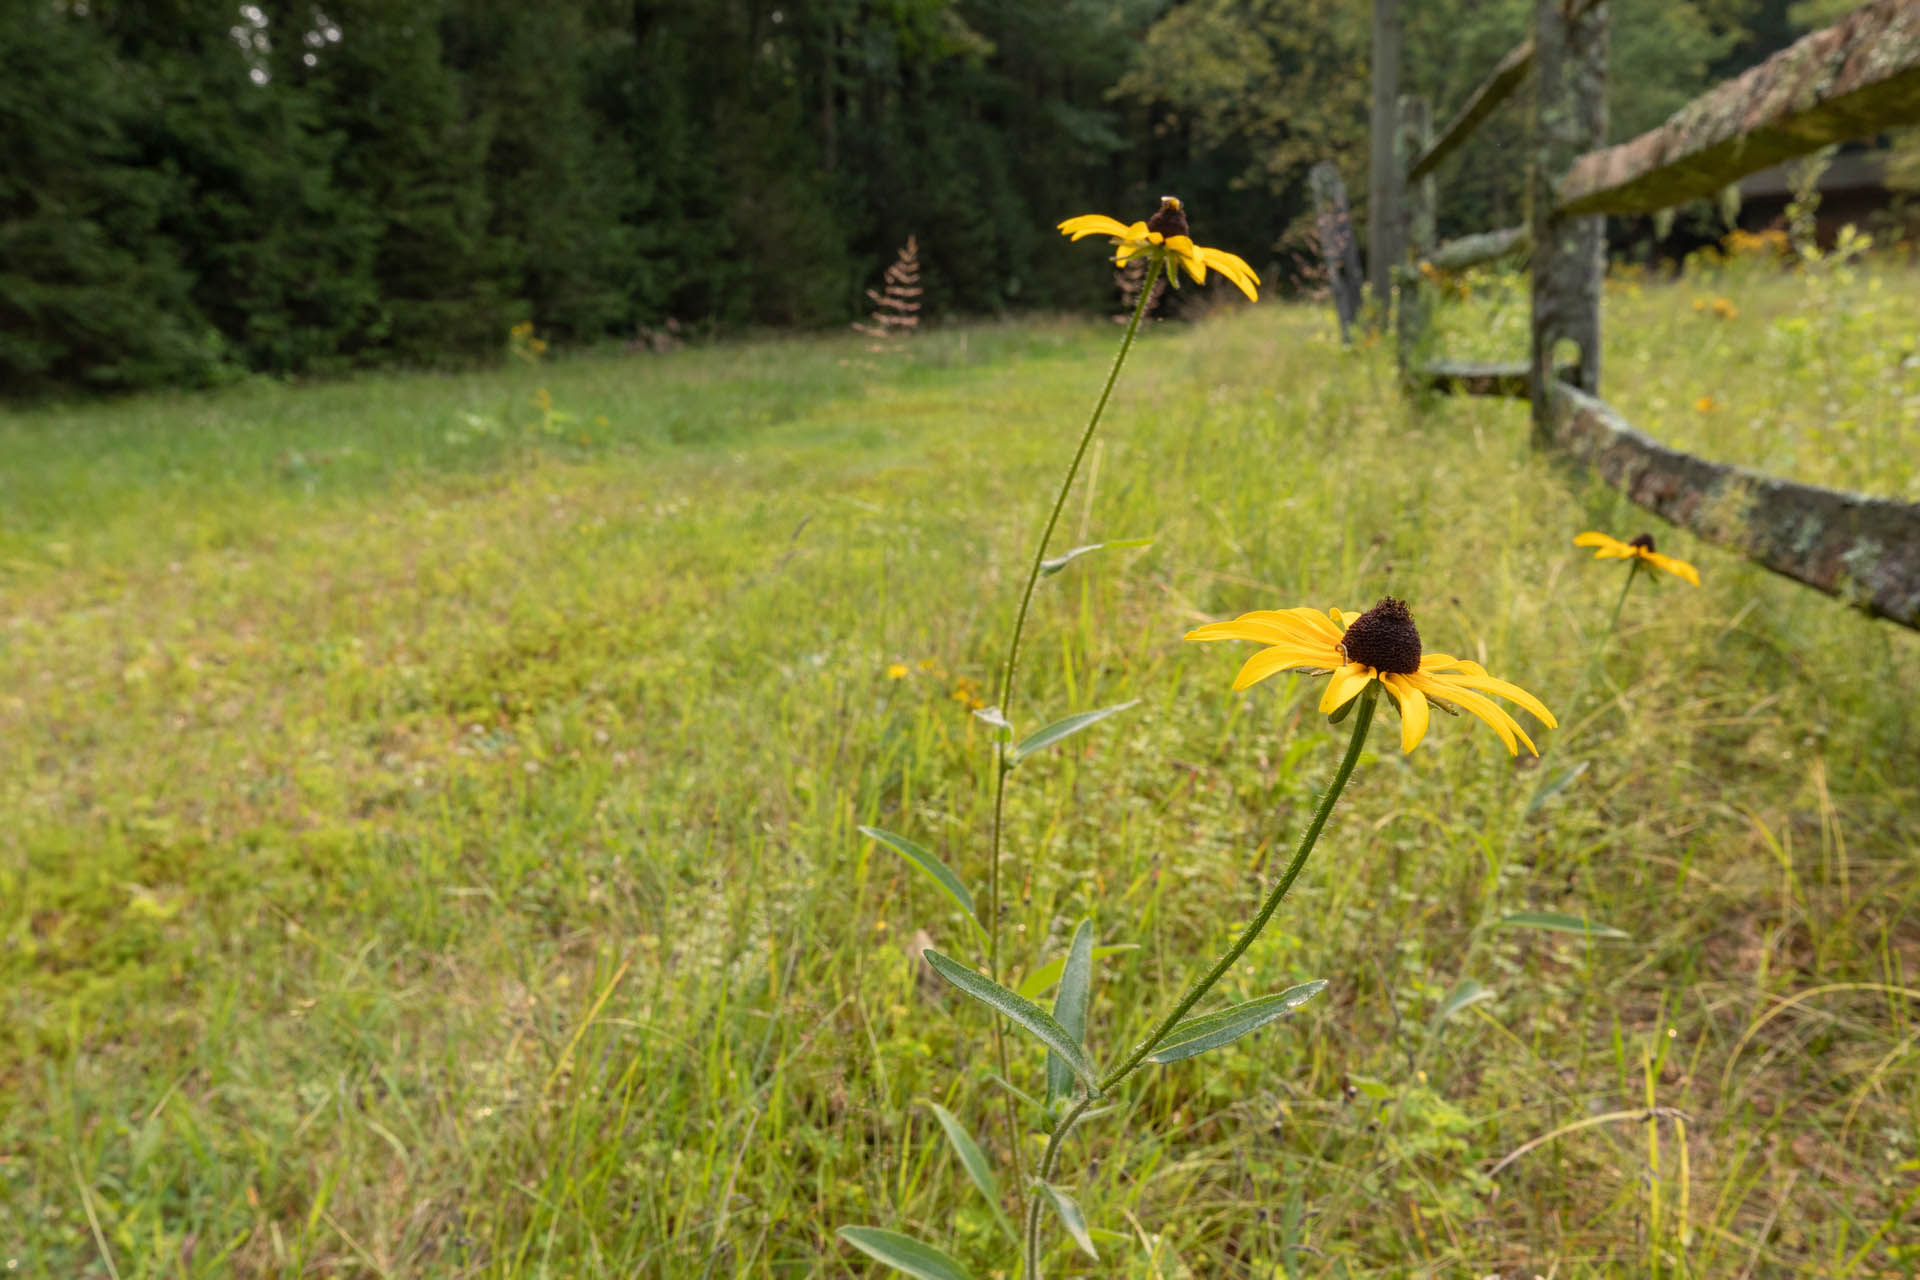 Three Black-eyed Susans next to an old wooden fence. A forest of pine trees in the distance.